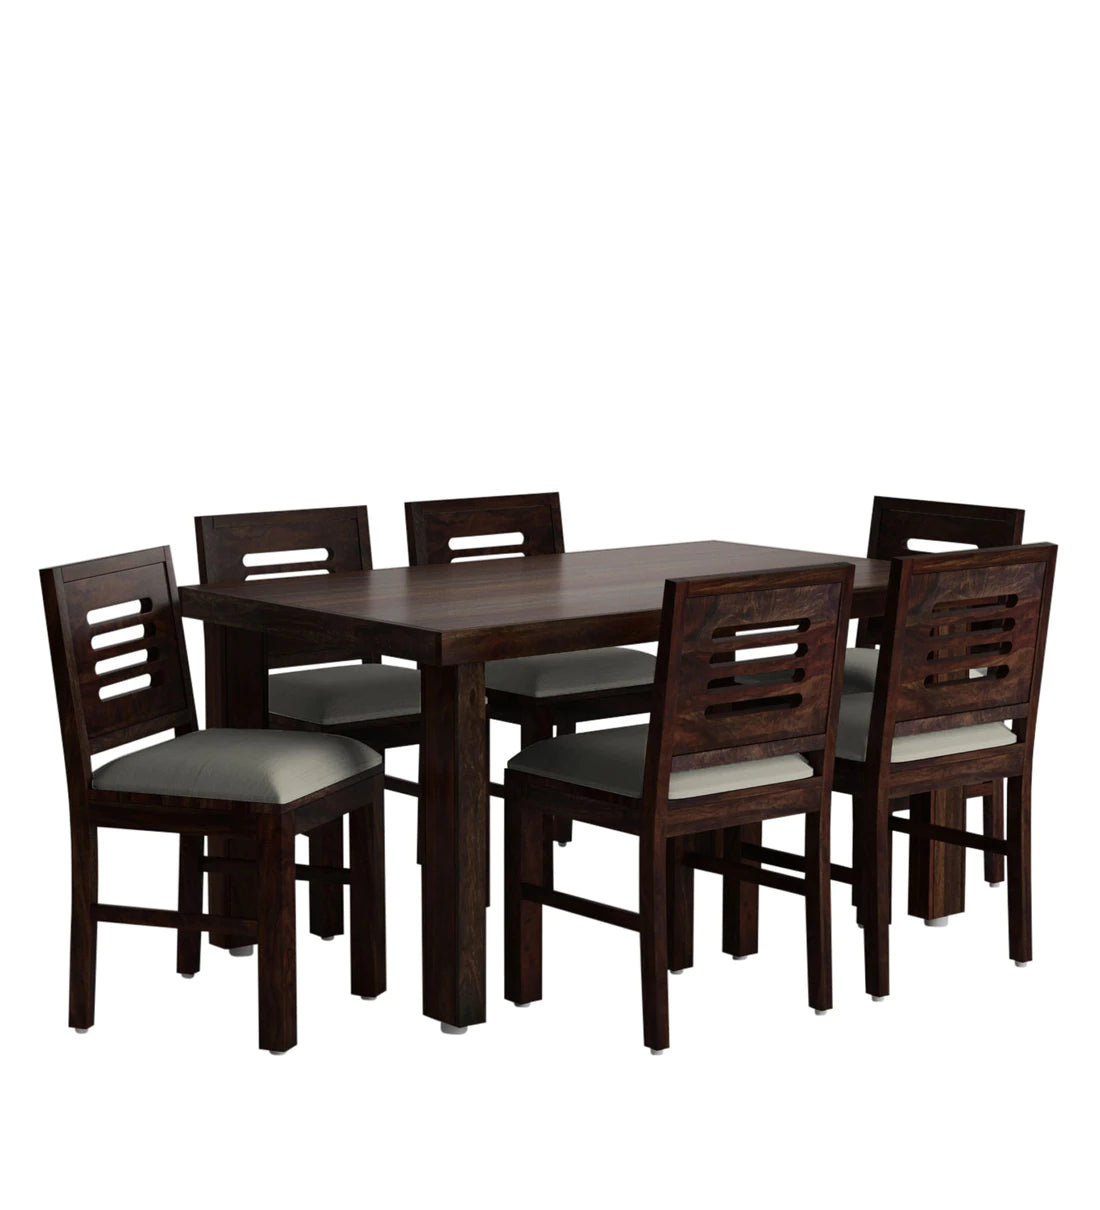 Acro Wooden 6 Seater Cushioned Dining Set For Dining Room - Rajwada Furnish